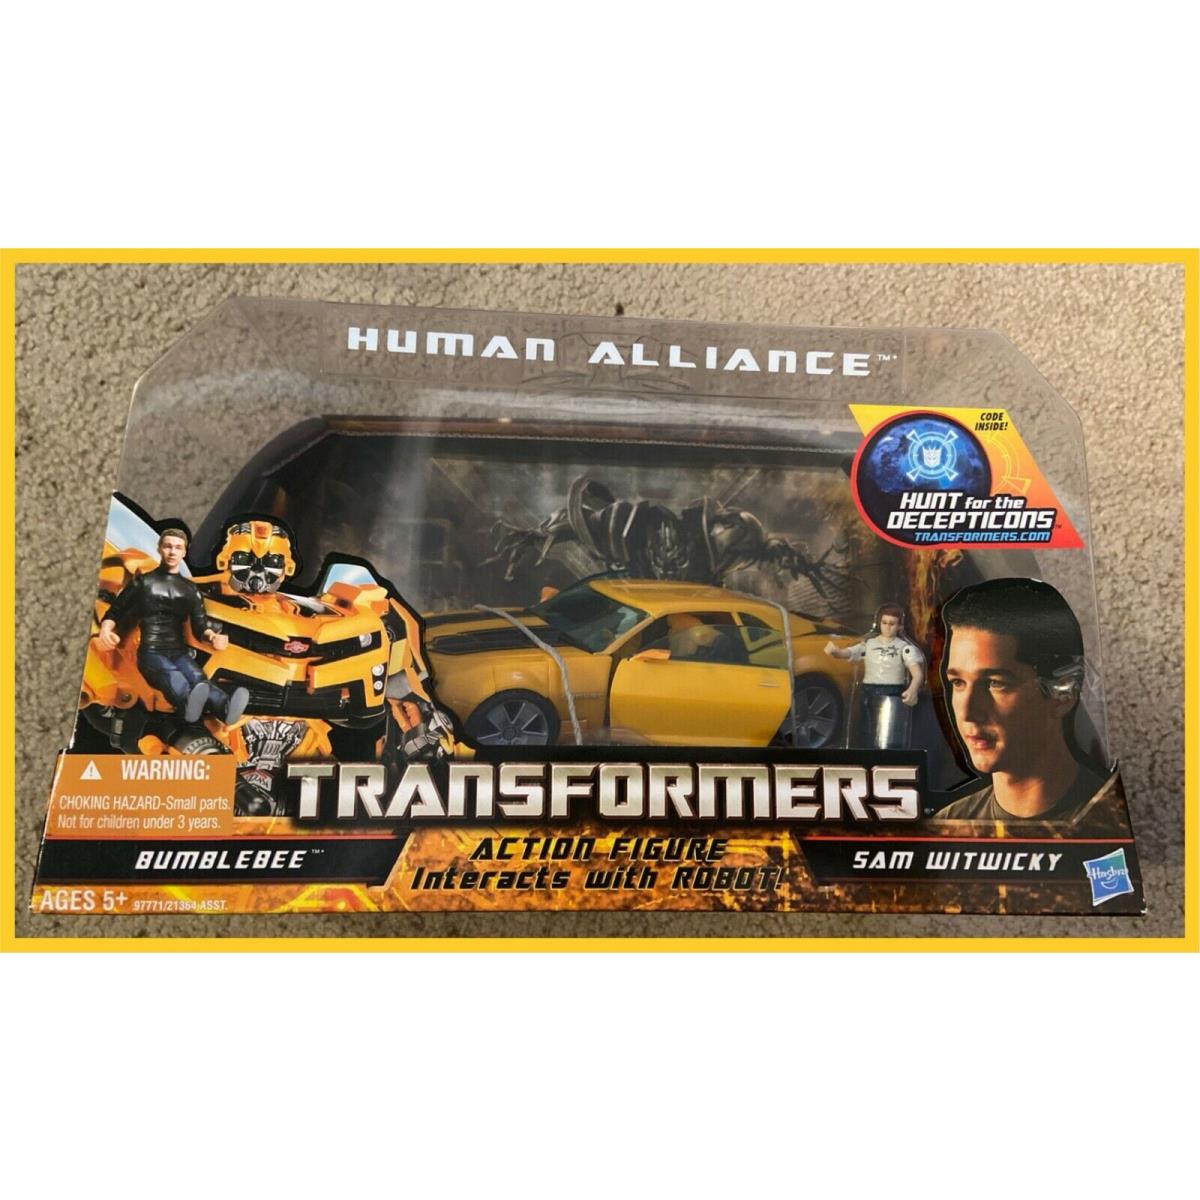 2010 Transformers Hftd _ Human Alliance _ Bumblebee with Sam Witwicky